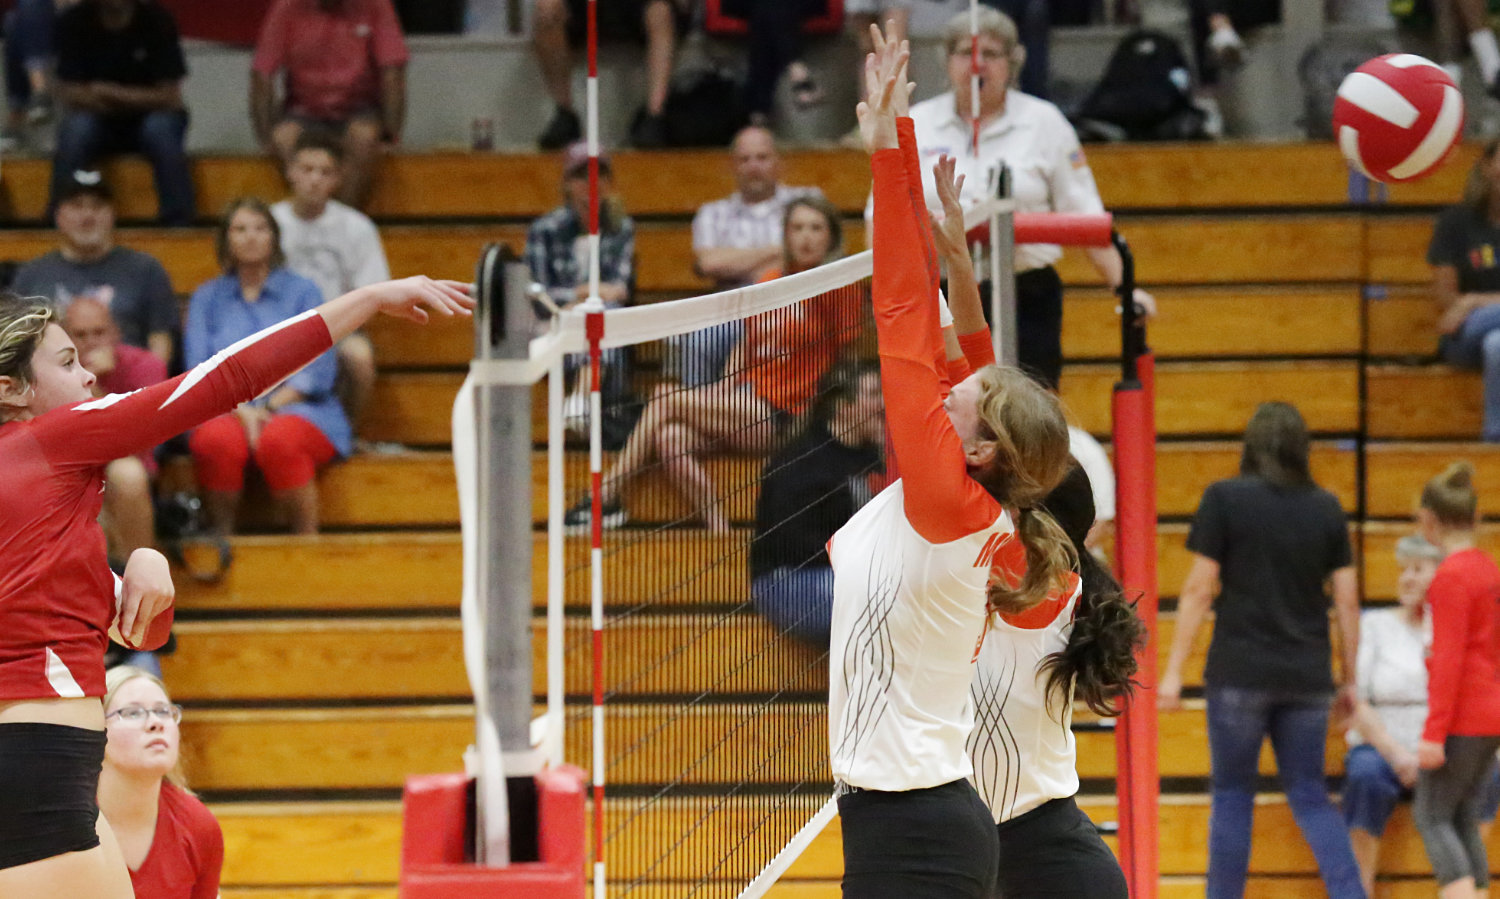 This snapshot of a Harmony kill on its way pretty much summarized last Tuesday’s match with the Lady Jackets.